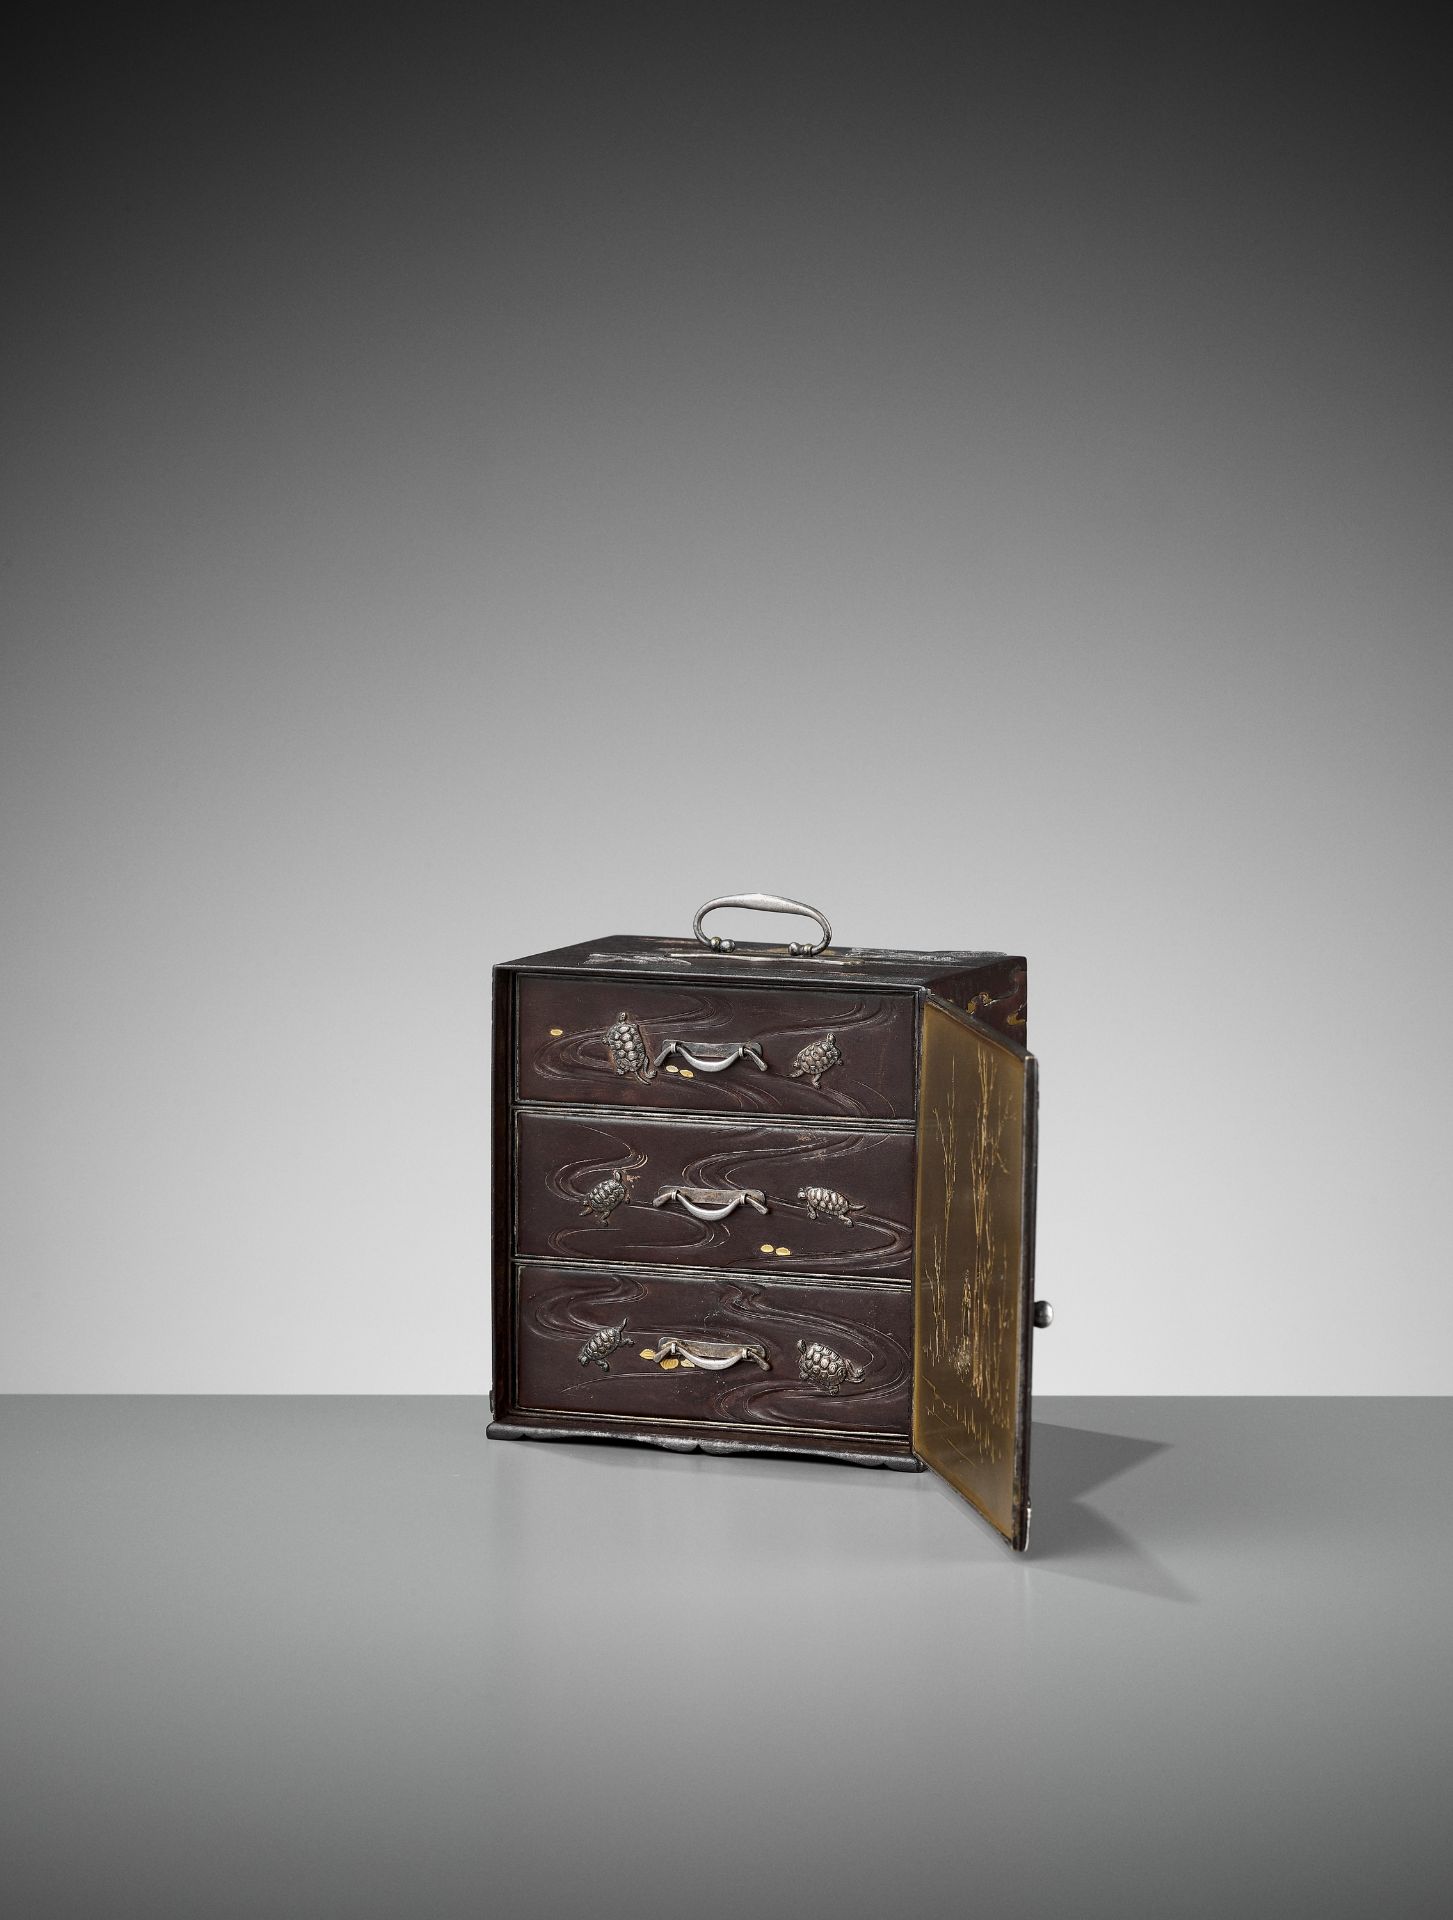 AN EXCEPTIONALLY RARE INLAID IRON MINIATURE KODANSU (CABINET) WITH TURTLES AND CRANES - Image 3 of 10